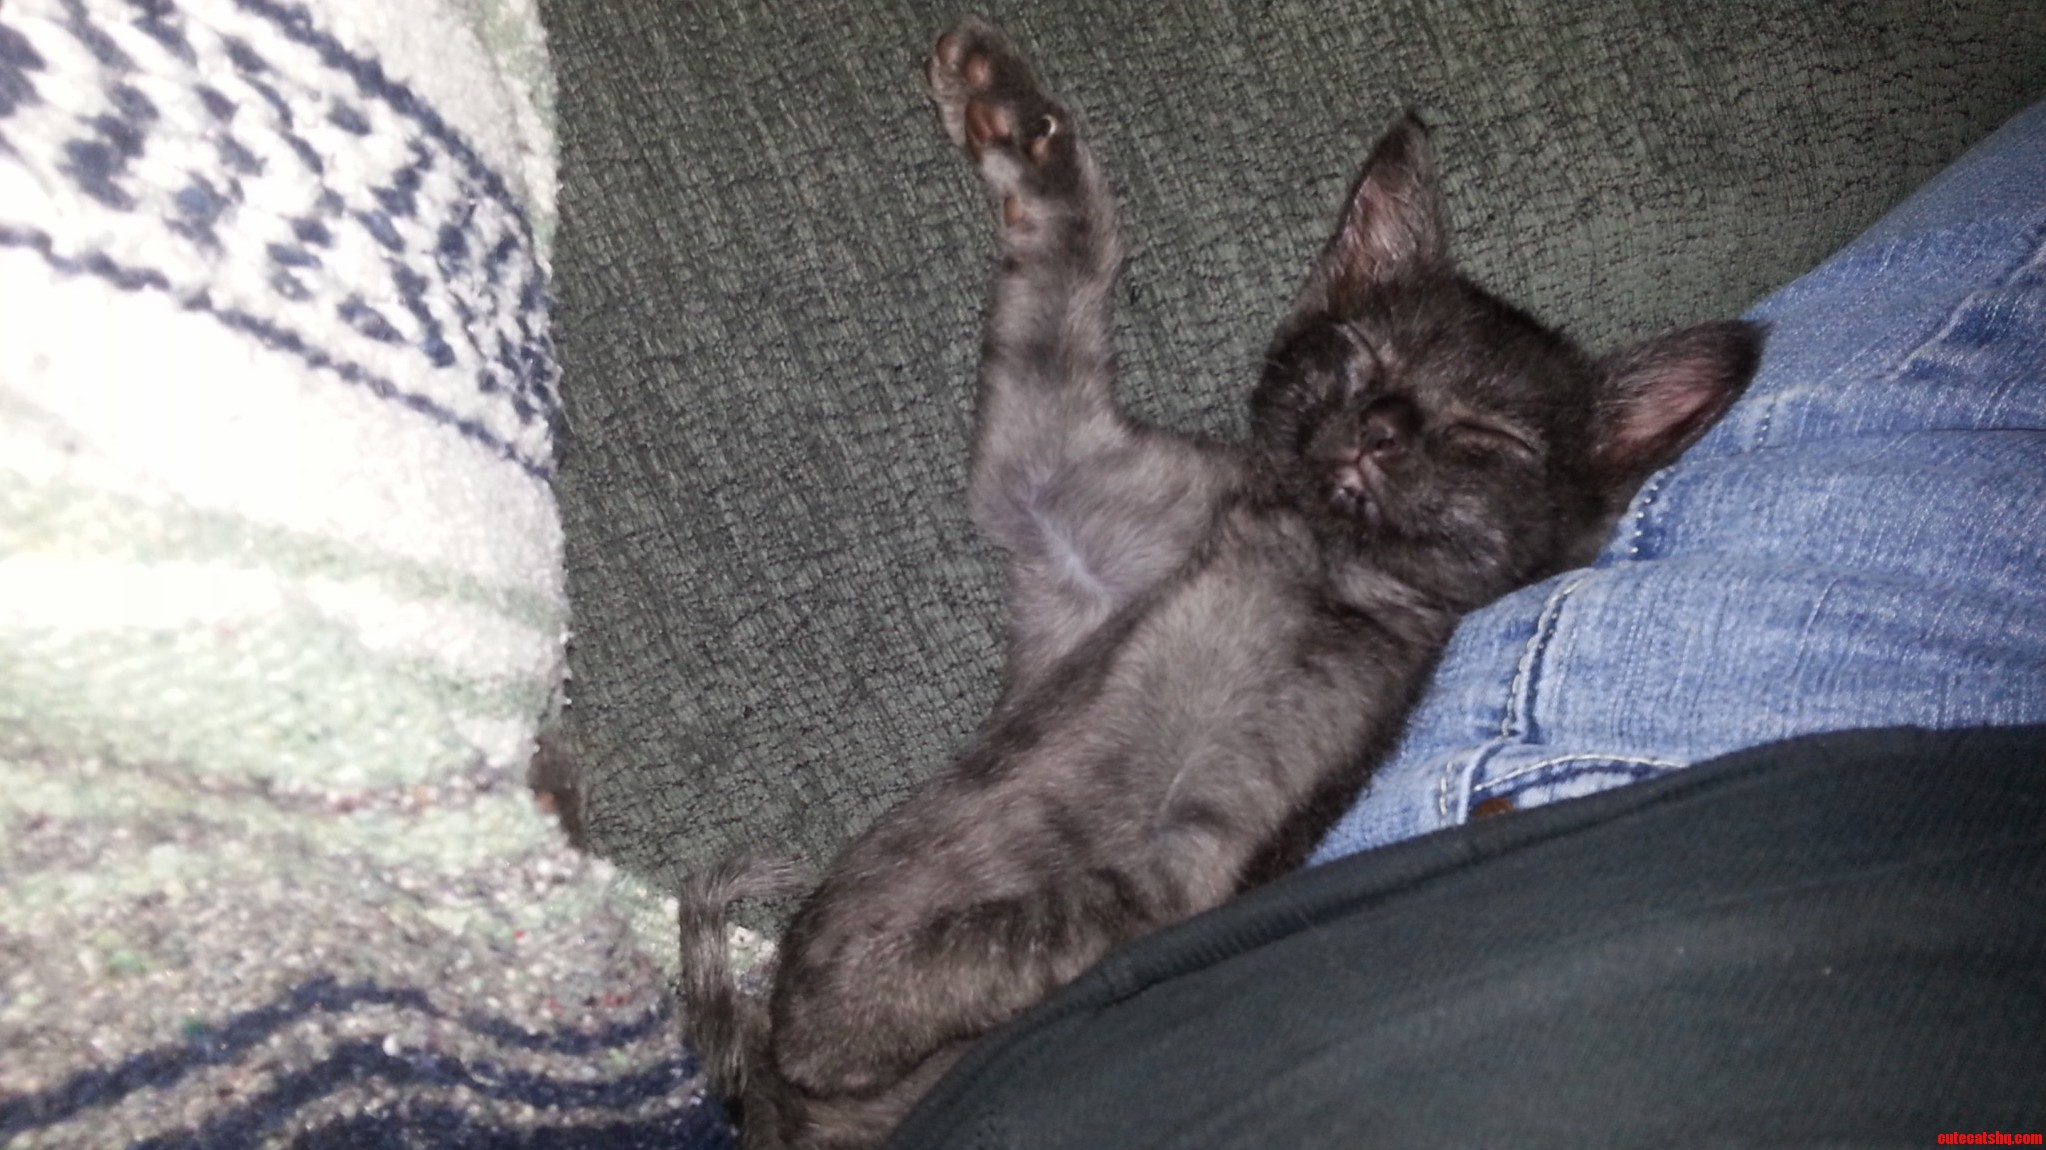 This Kitty Sleeps In The Weirdest Positions.